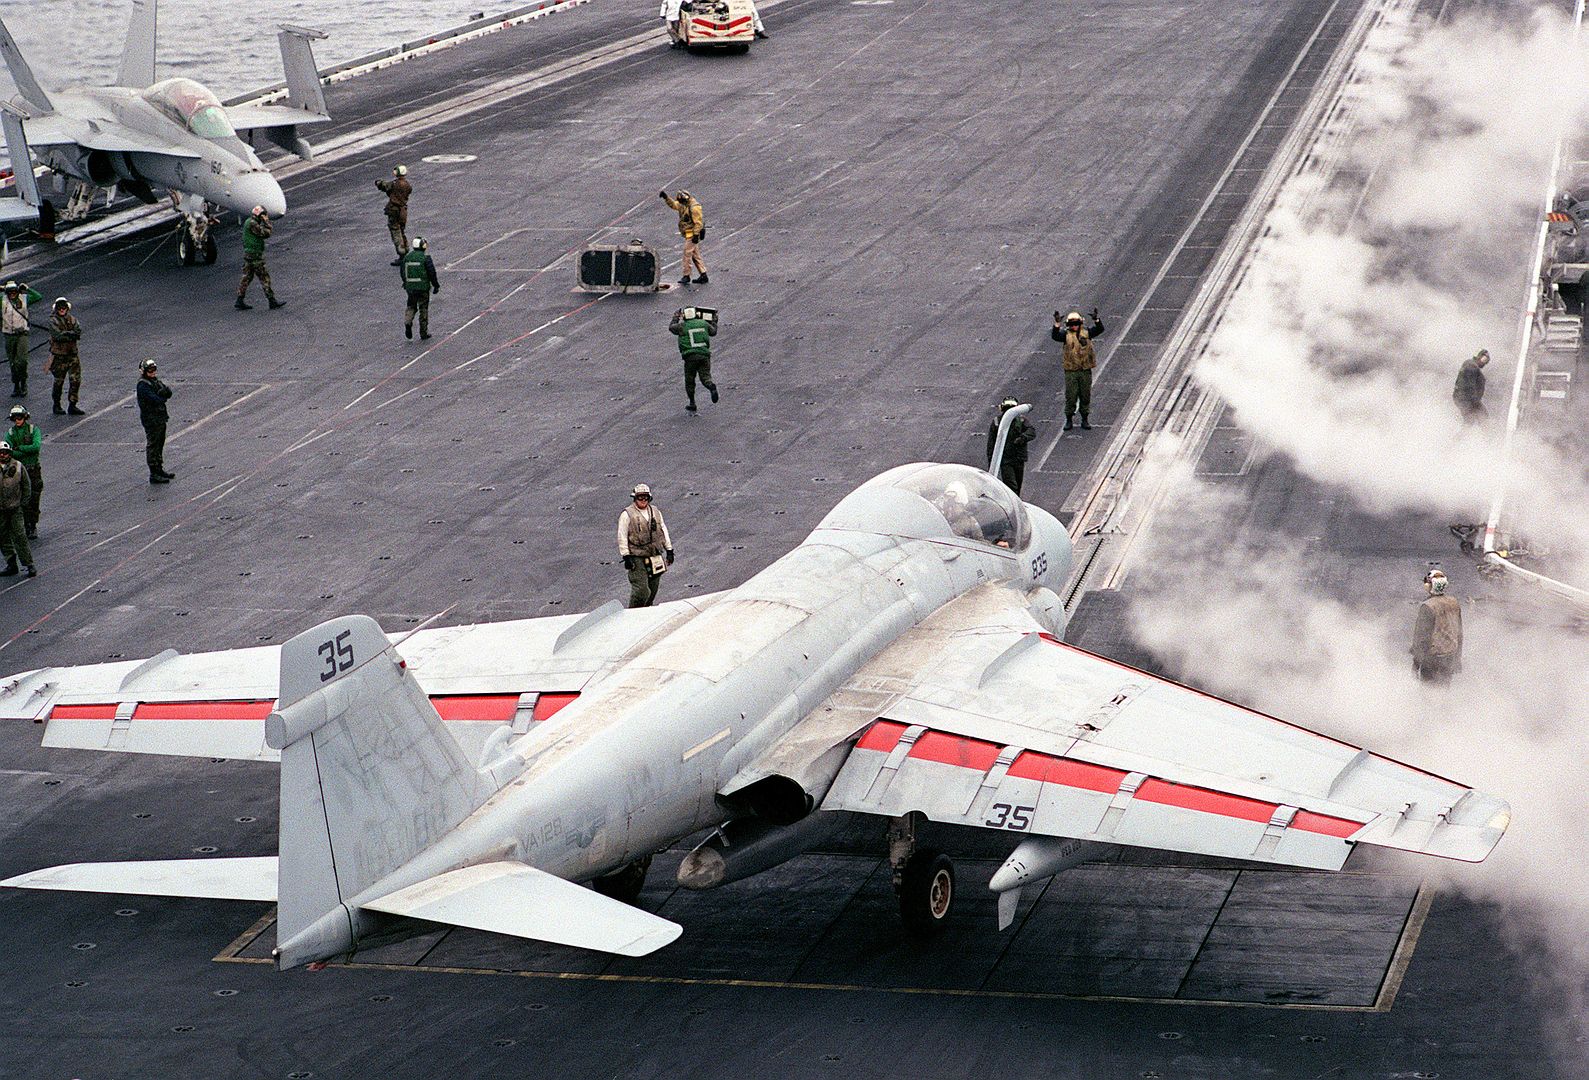 An Attack Squadron 128 A 6E Intruder Aircraft Lines Up On A Catapult For Launch As Steam Clears From A Previous Launch On The Flight Deck Of The Aircraft Carrier USS RANGER